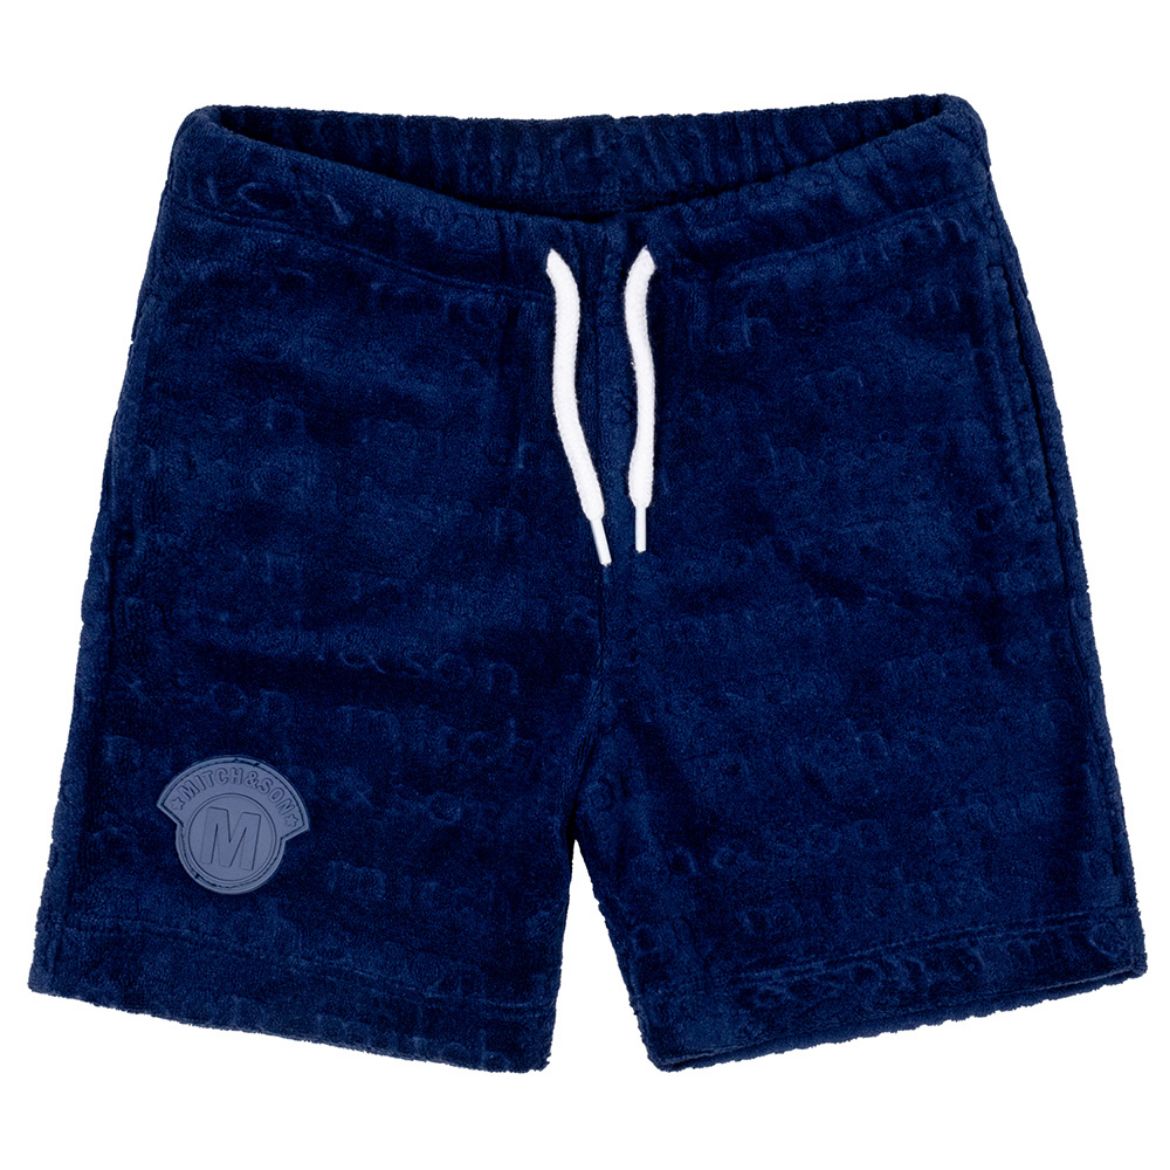 Picture of Mitch & Son Whitmore Navy Short